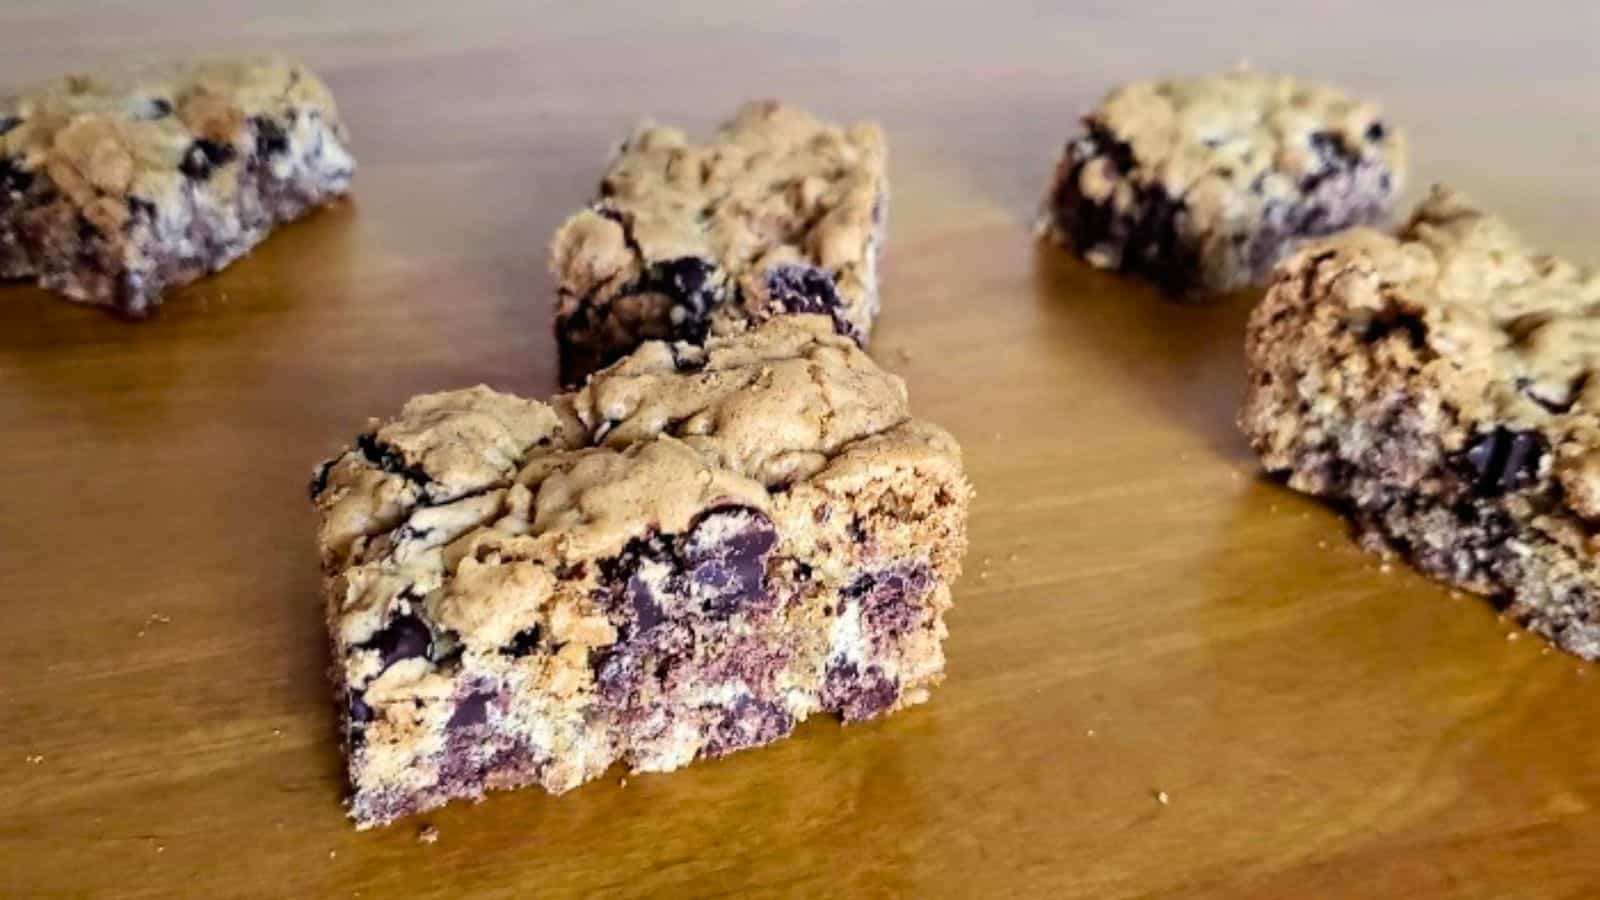 Image shows A group of chocolate chip oat bars on a wooden table.